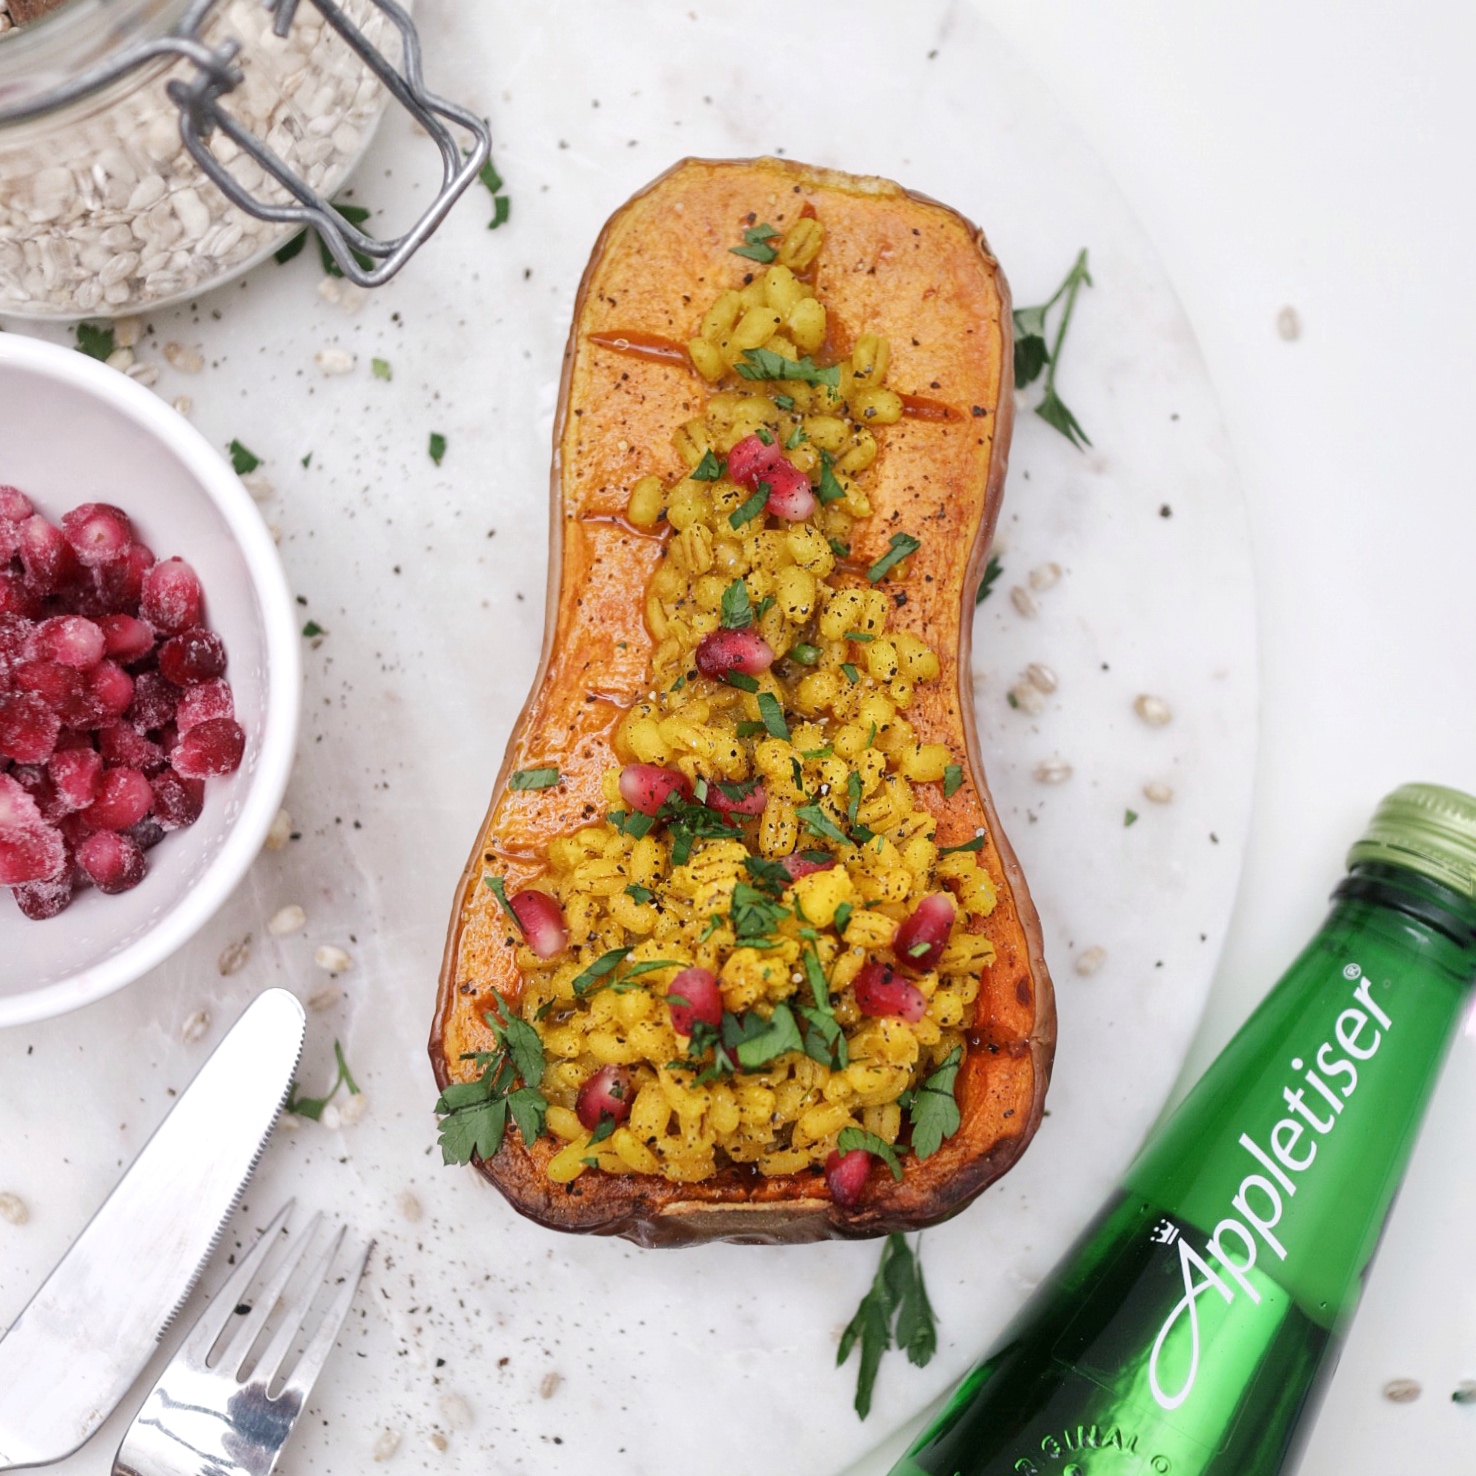 Half a stuffed butternut squash filled with curried barley and pomegranate seeds on top